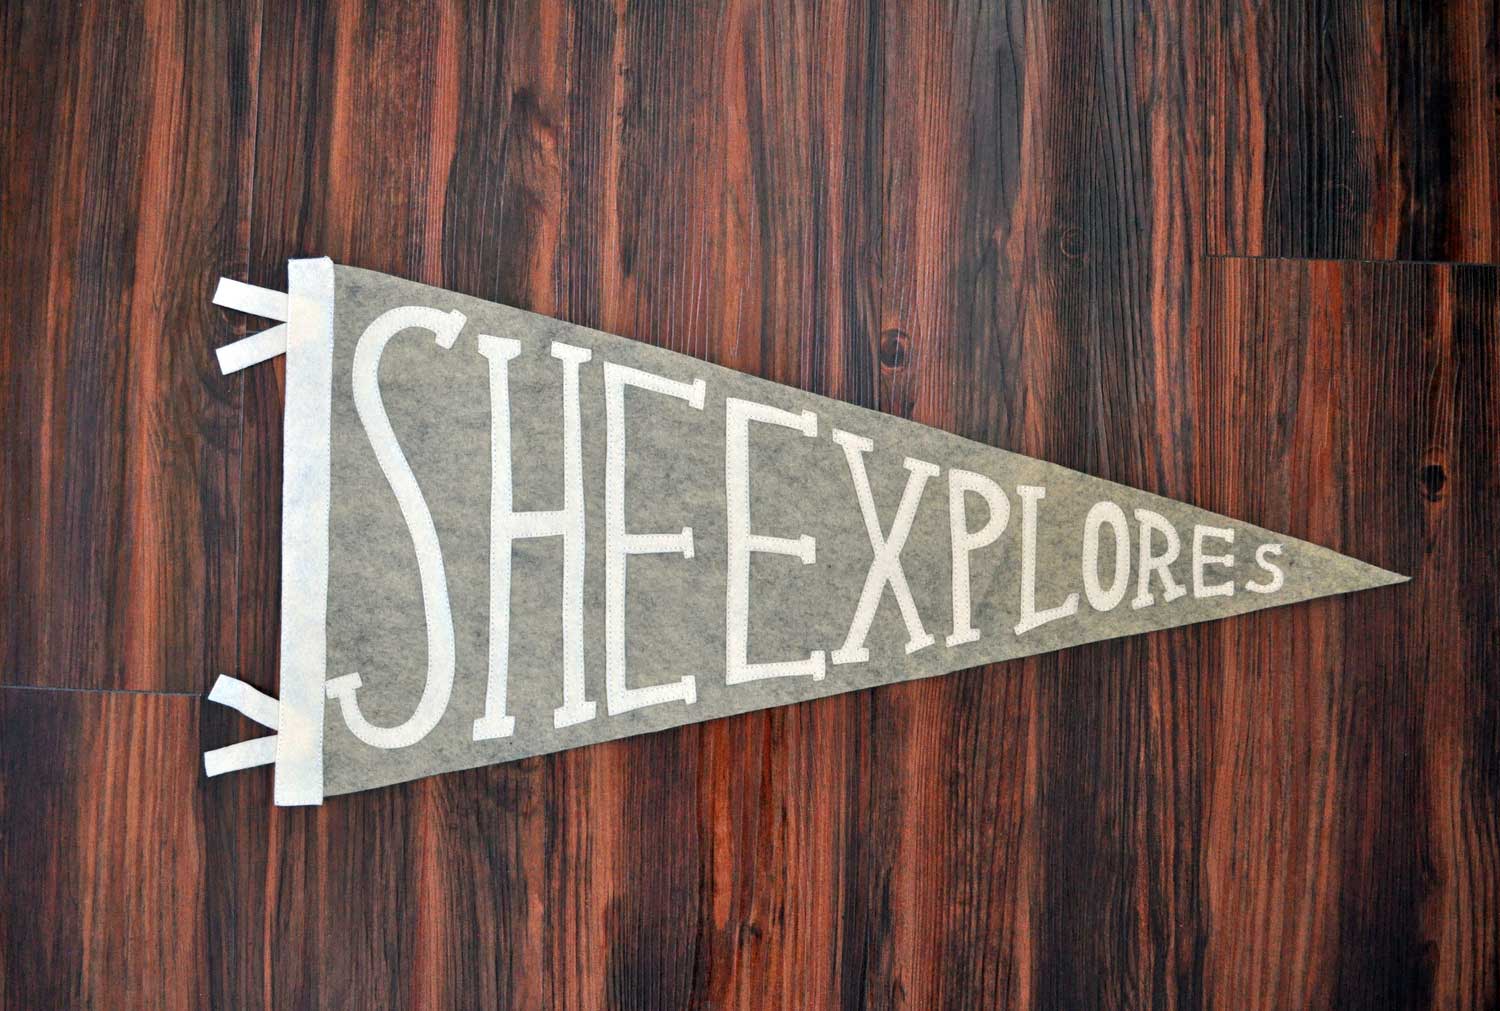 Jackie made a custom pennant for She Explores